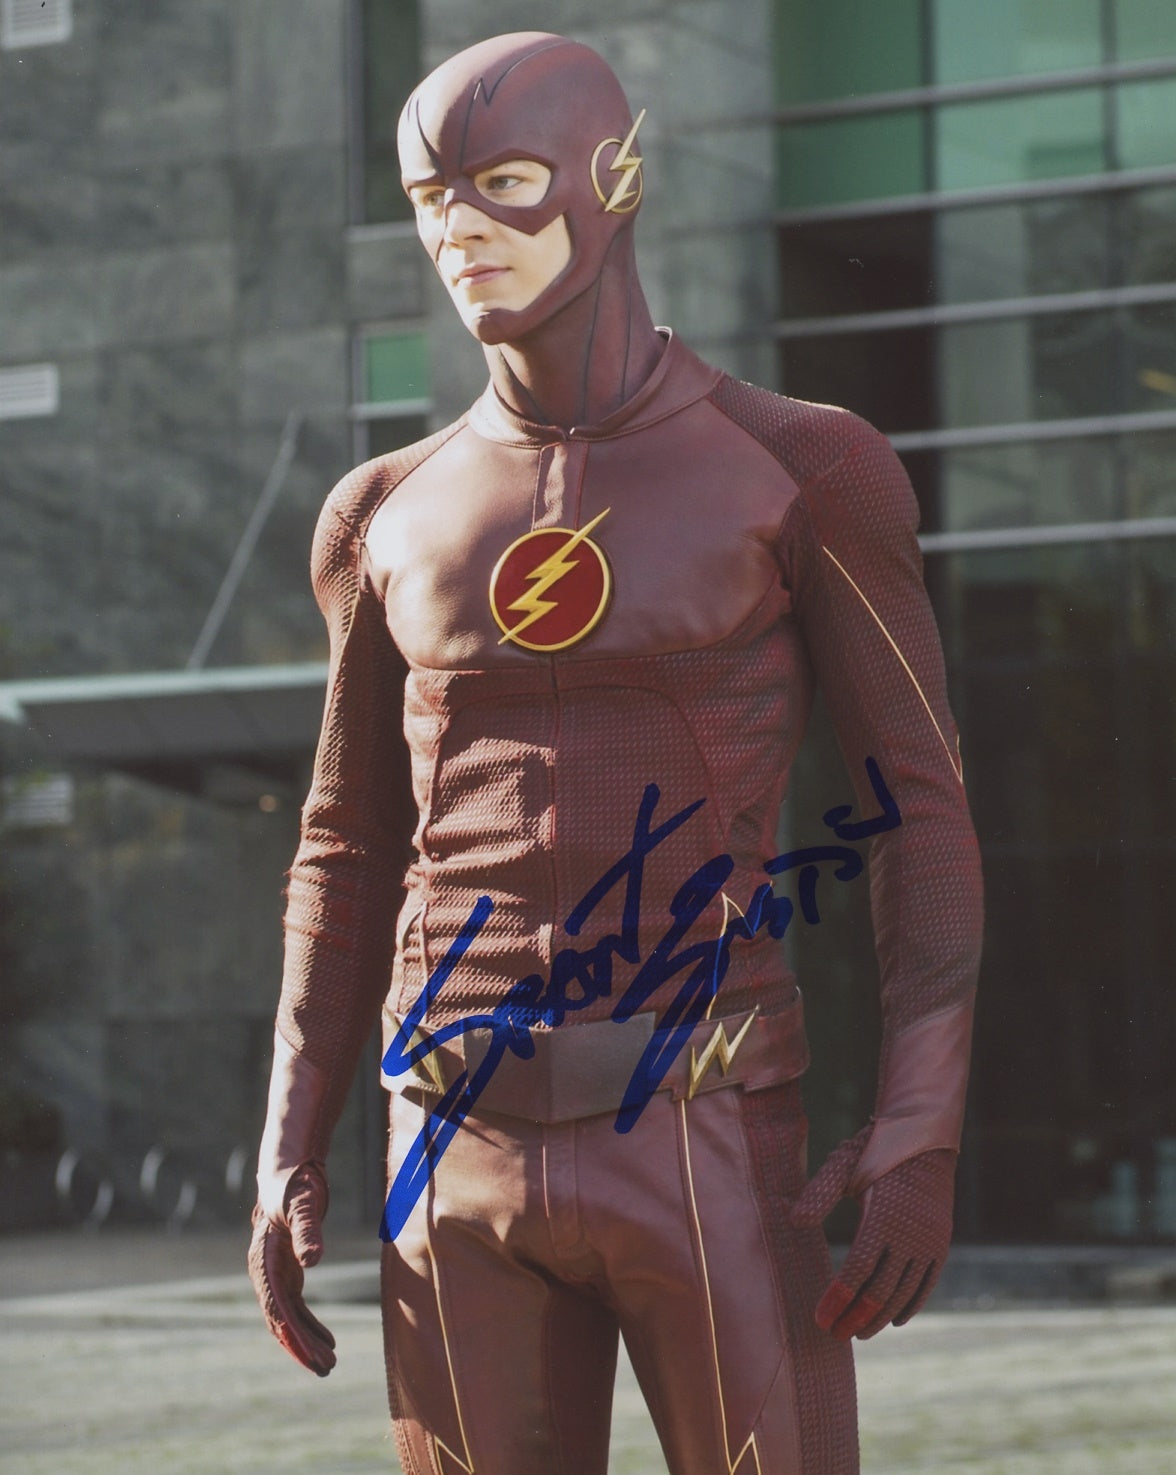 Grant Gustin Signed 8x10 Photo